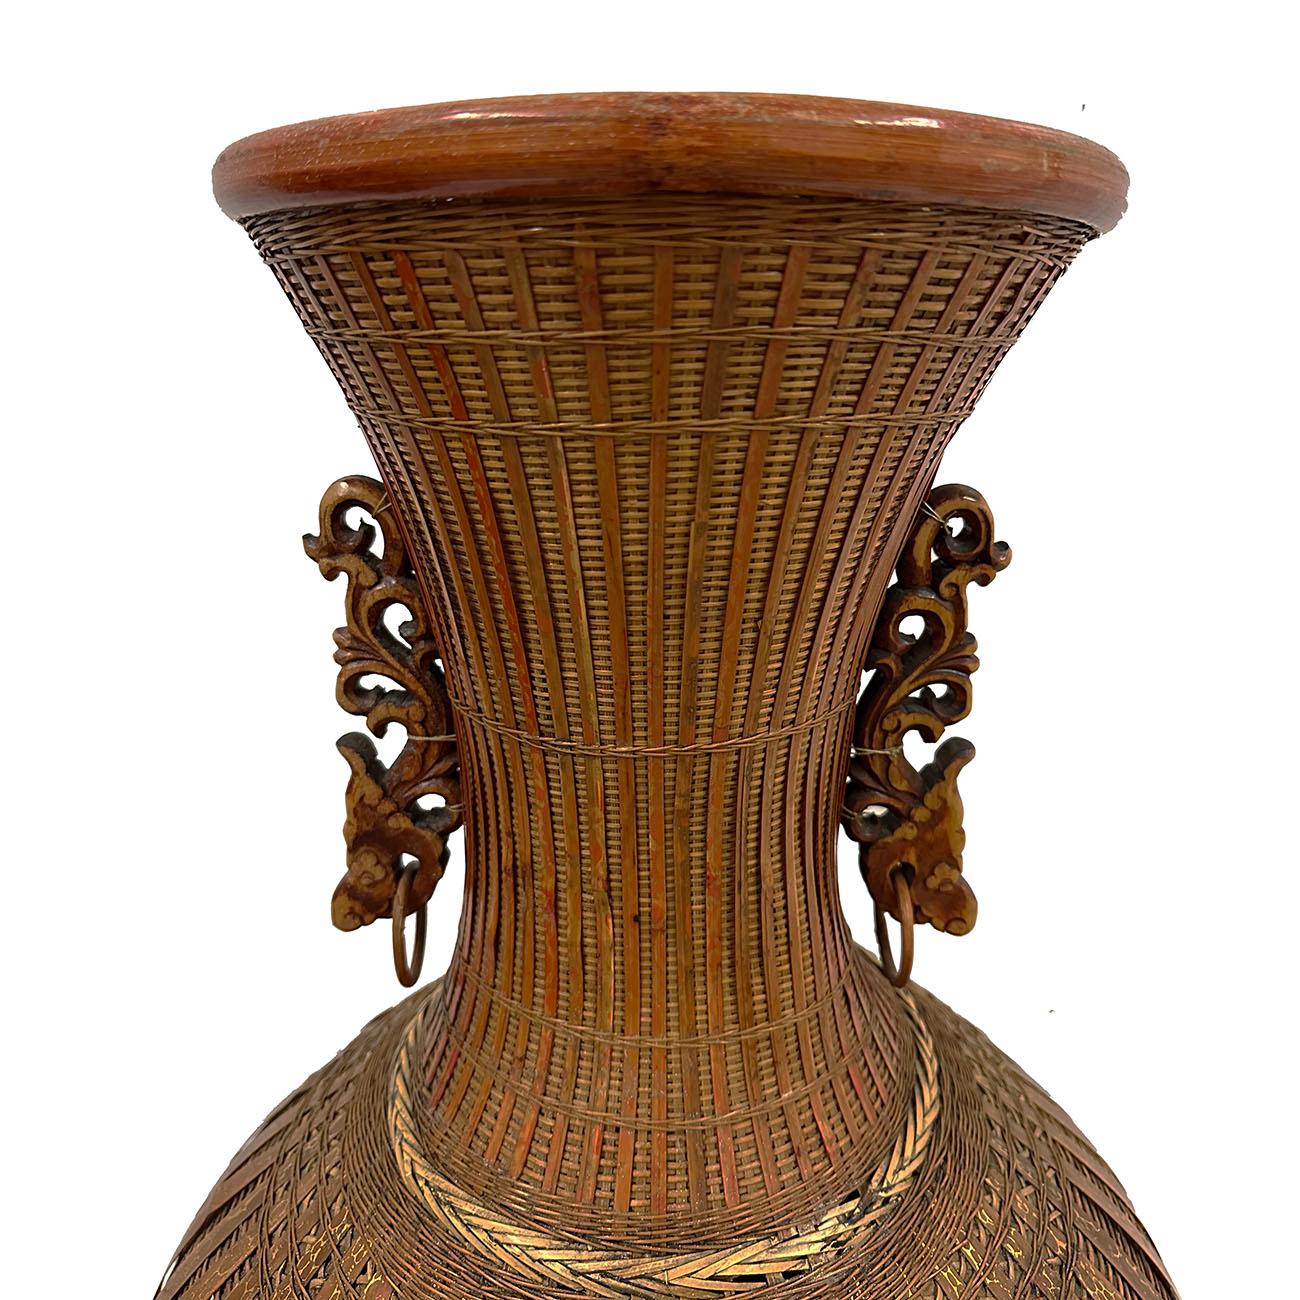 This rare and magnificent Vintage Chinese bamboo vase was 100% hand woven with bamboo strips. It has very exquisite bamboo weave honesty with detailed dragon carving on the side ears. It is truly an antique and collectible item and a perfect